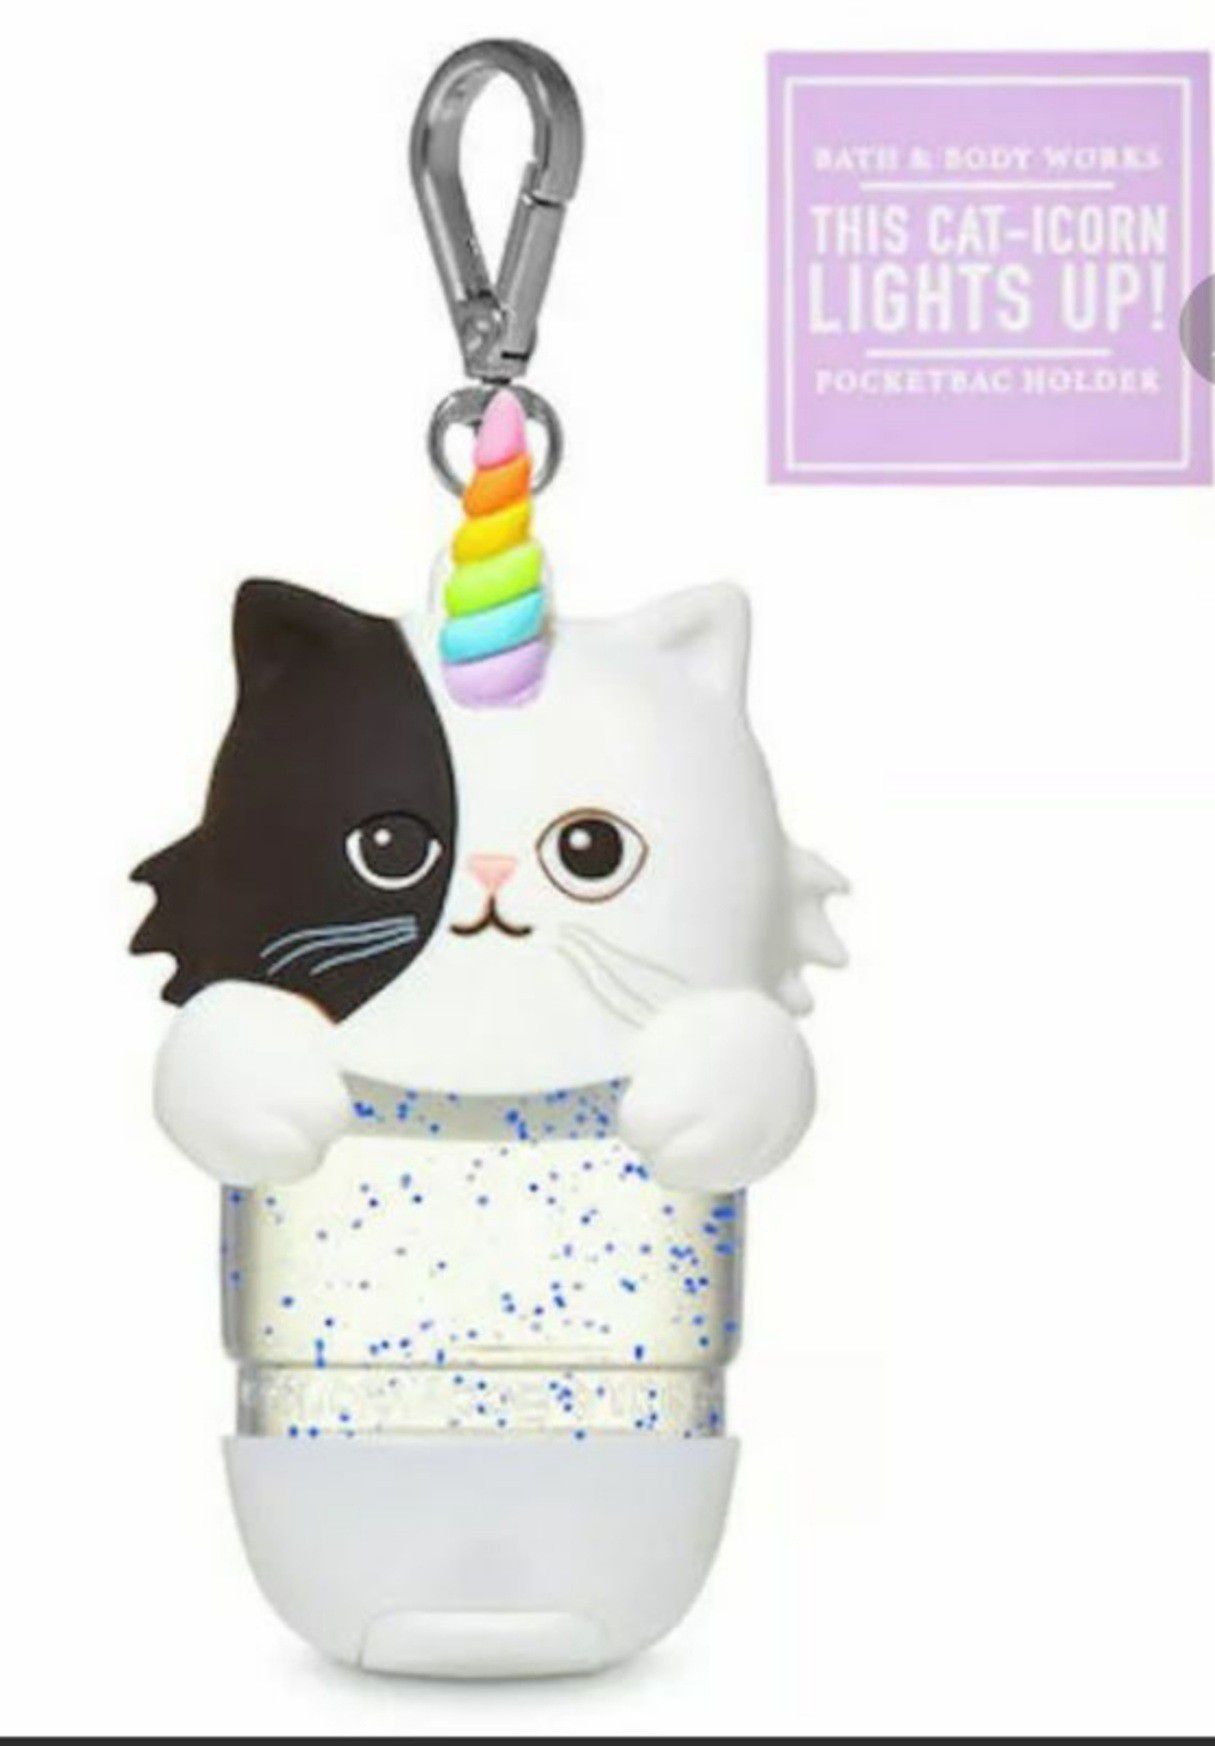 Caticorn Bath and Body Works Pocket Bac Holder and Clip